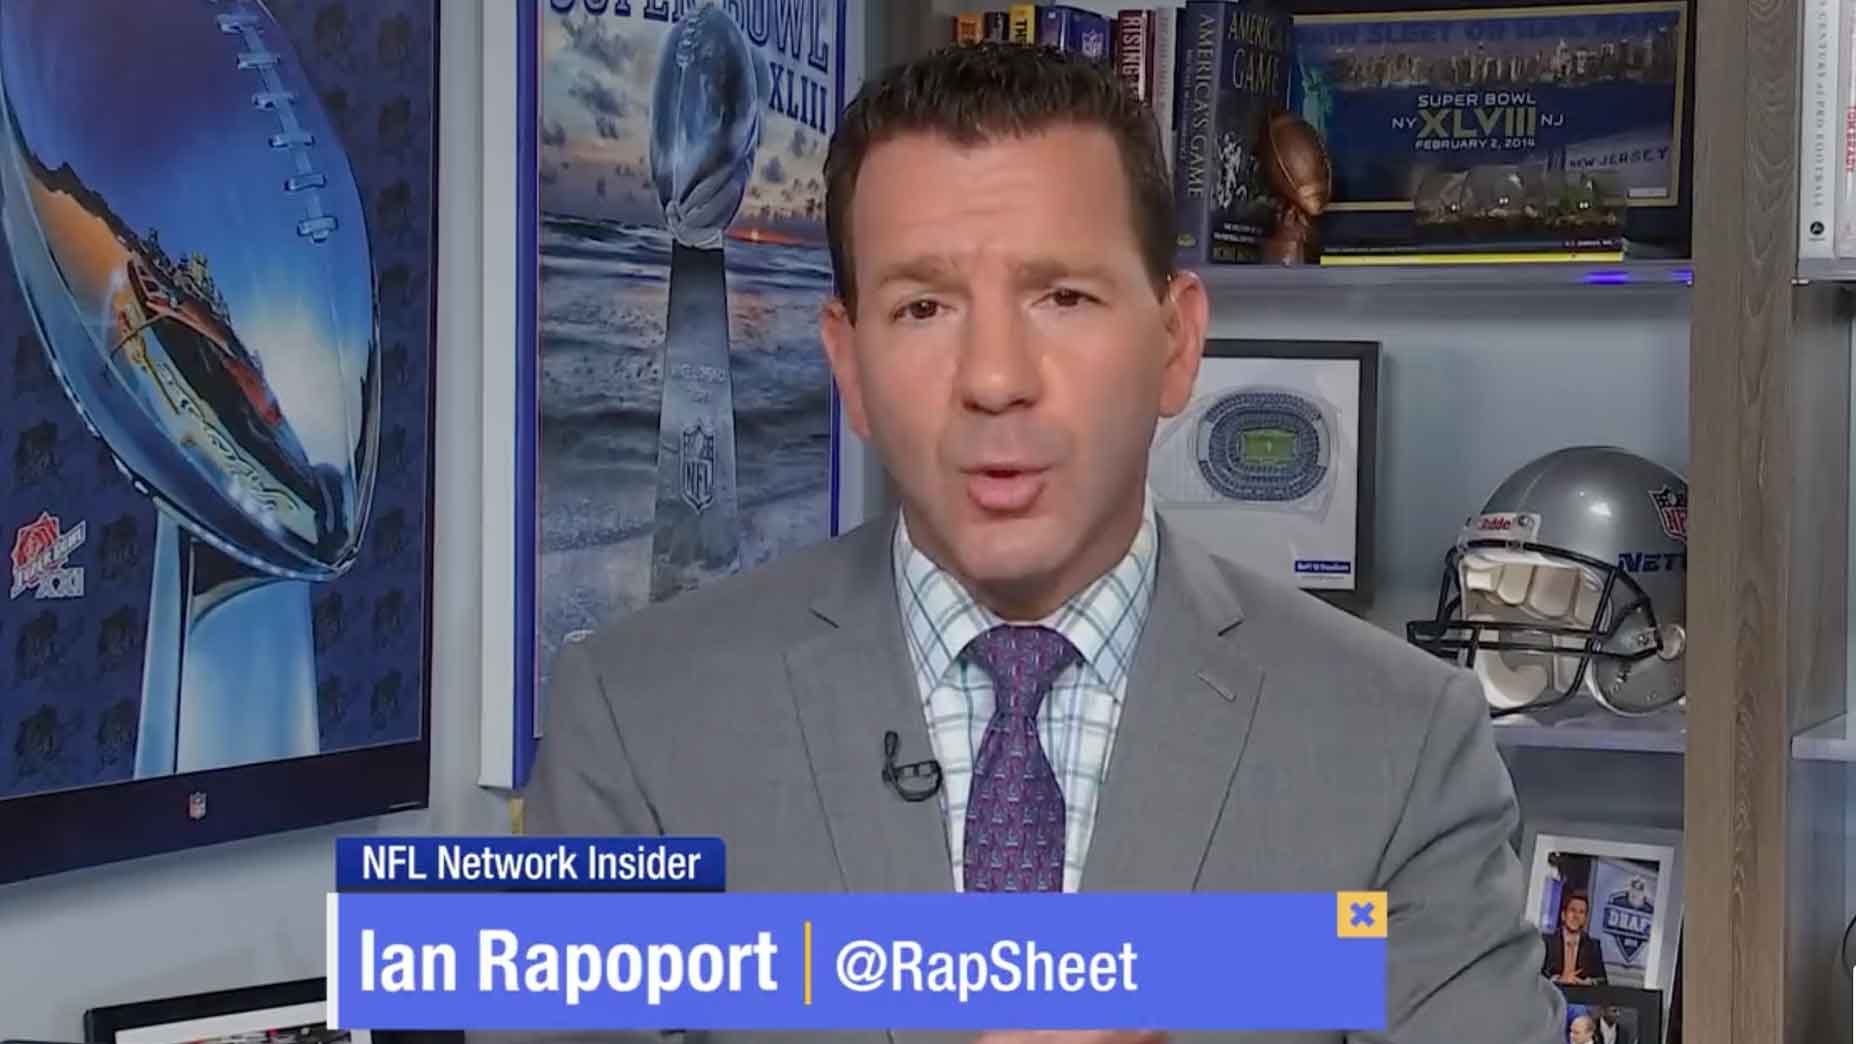 NFL Insider Ian Rapoport ranks his favorite golf courses in the world